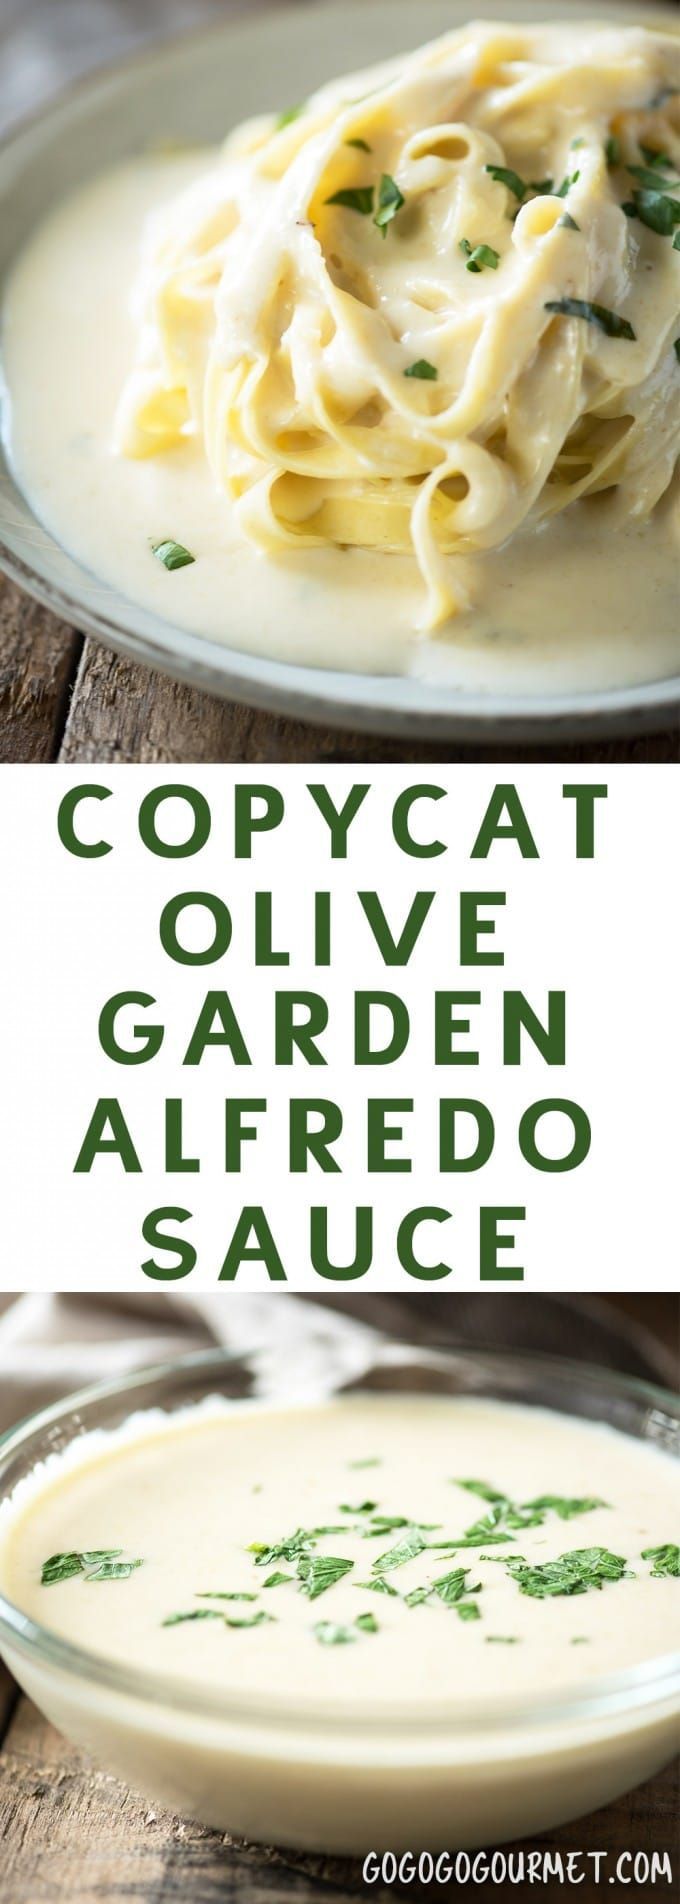 This Copycat Olive Garden Alfredo Sauce is a fast and easy dinner, and even better than the original! The perfect alfredo sauce recipe. |  via @gogogogourmet -   21 alfredo pasta recipes
 ideas